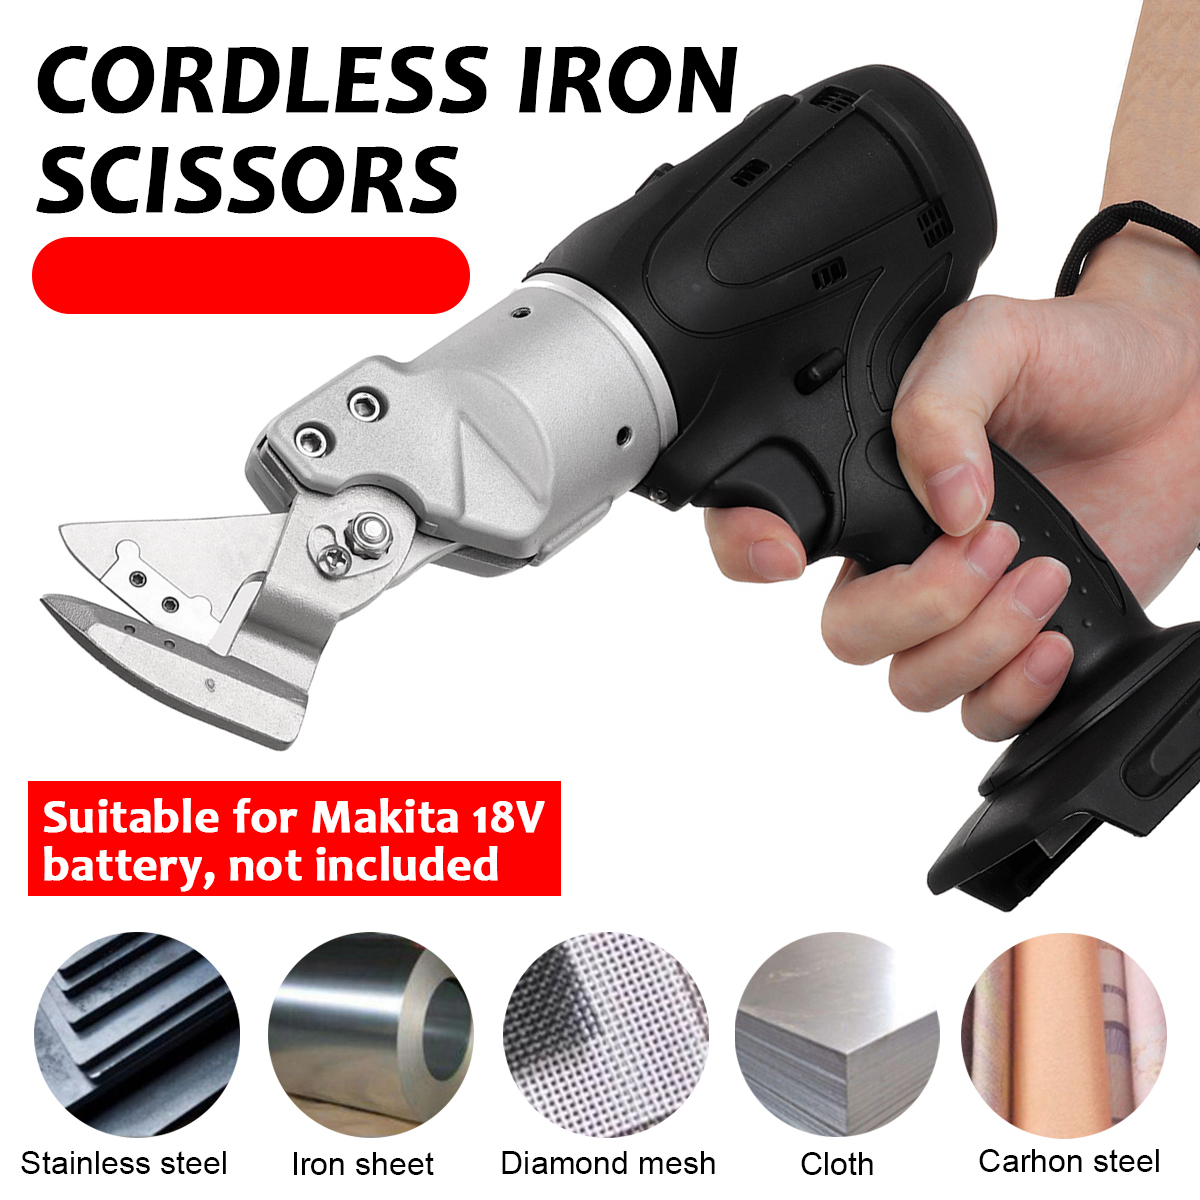 300NM-Electric-Scissors-Cordless-Stainless-Steel-Metal-Iron-Cutting-Power-Tools-For-Makita-18V-Batte-1879169-3